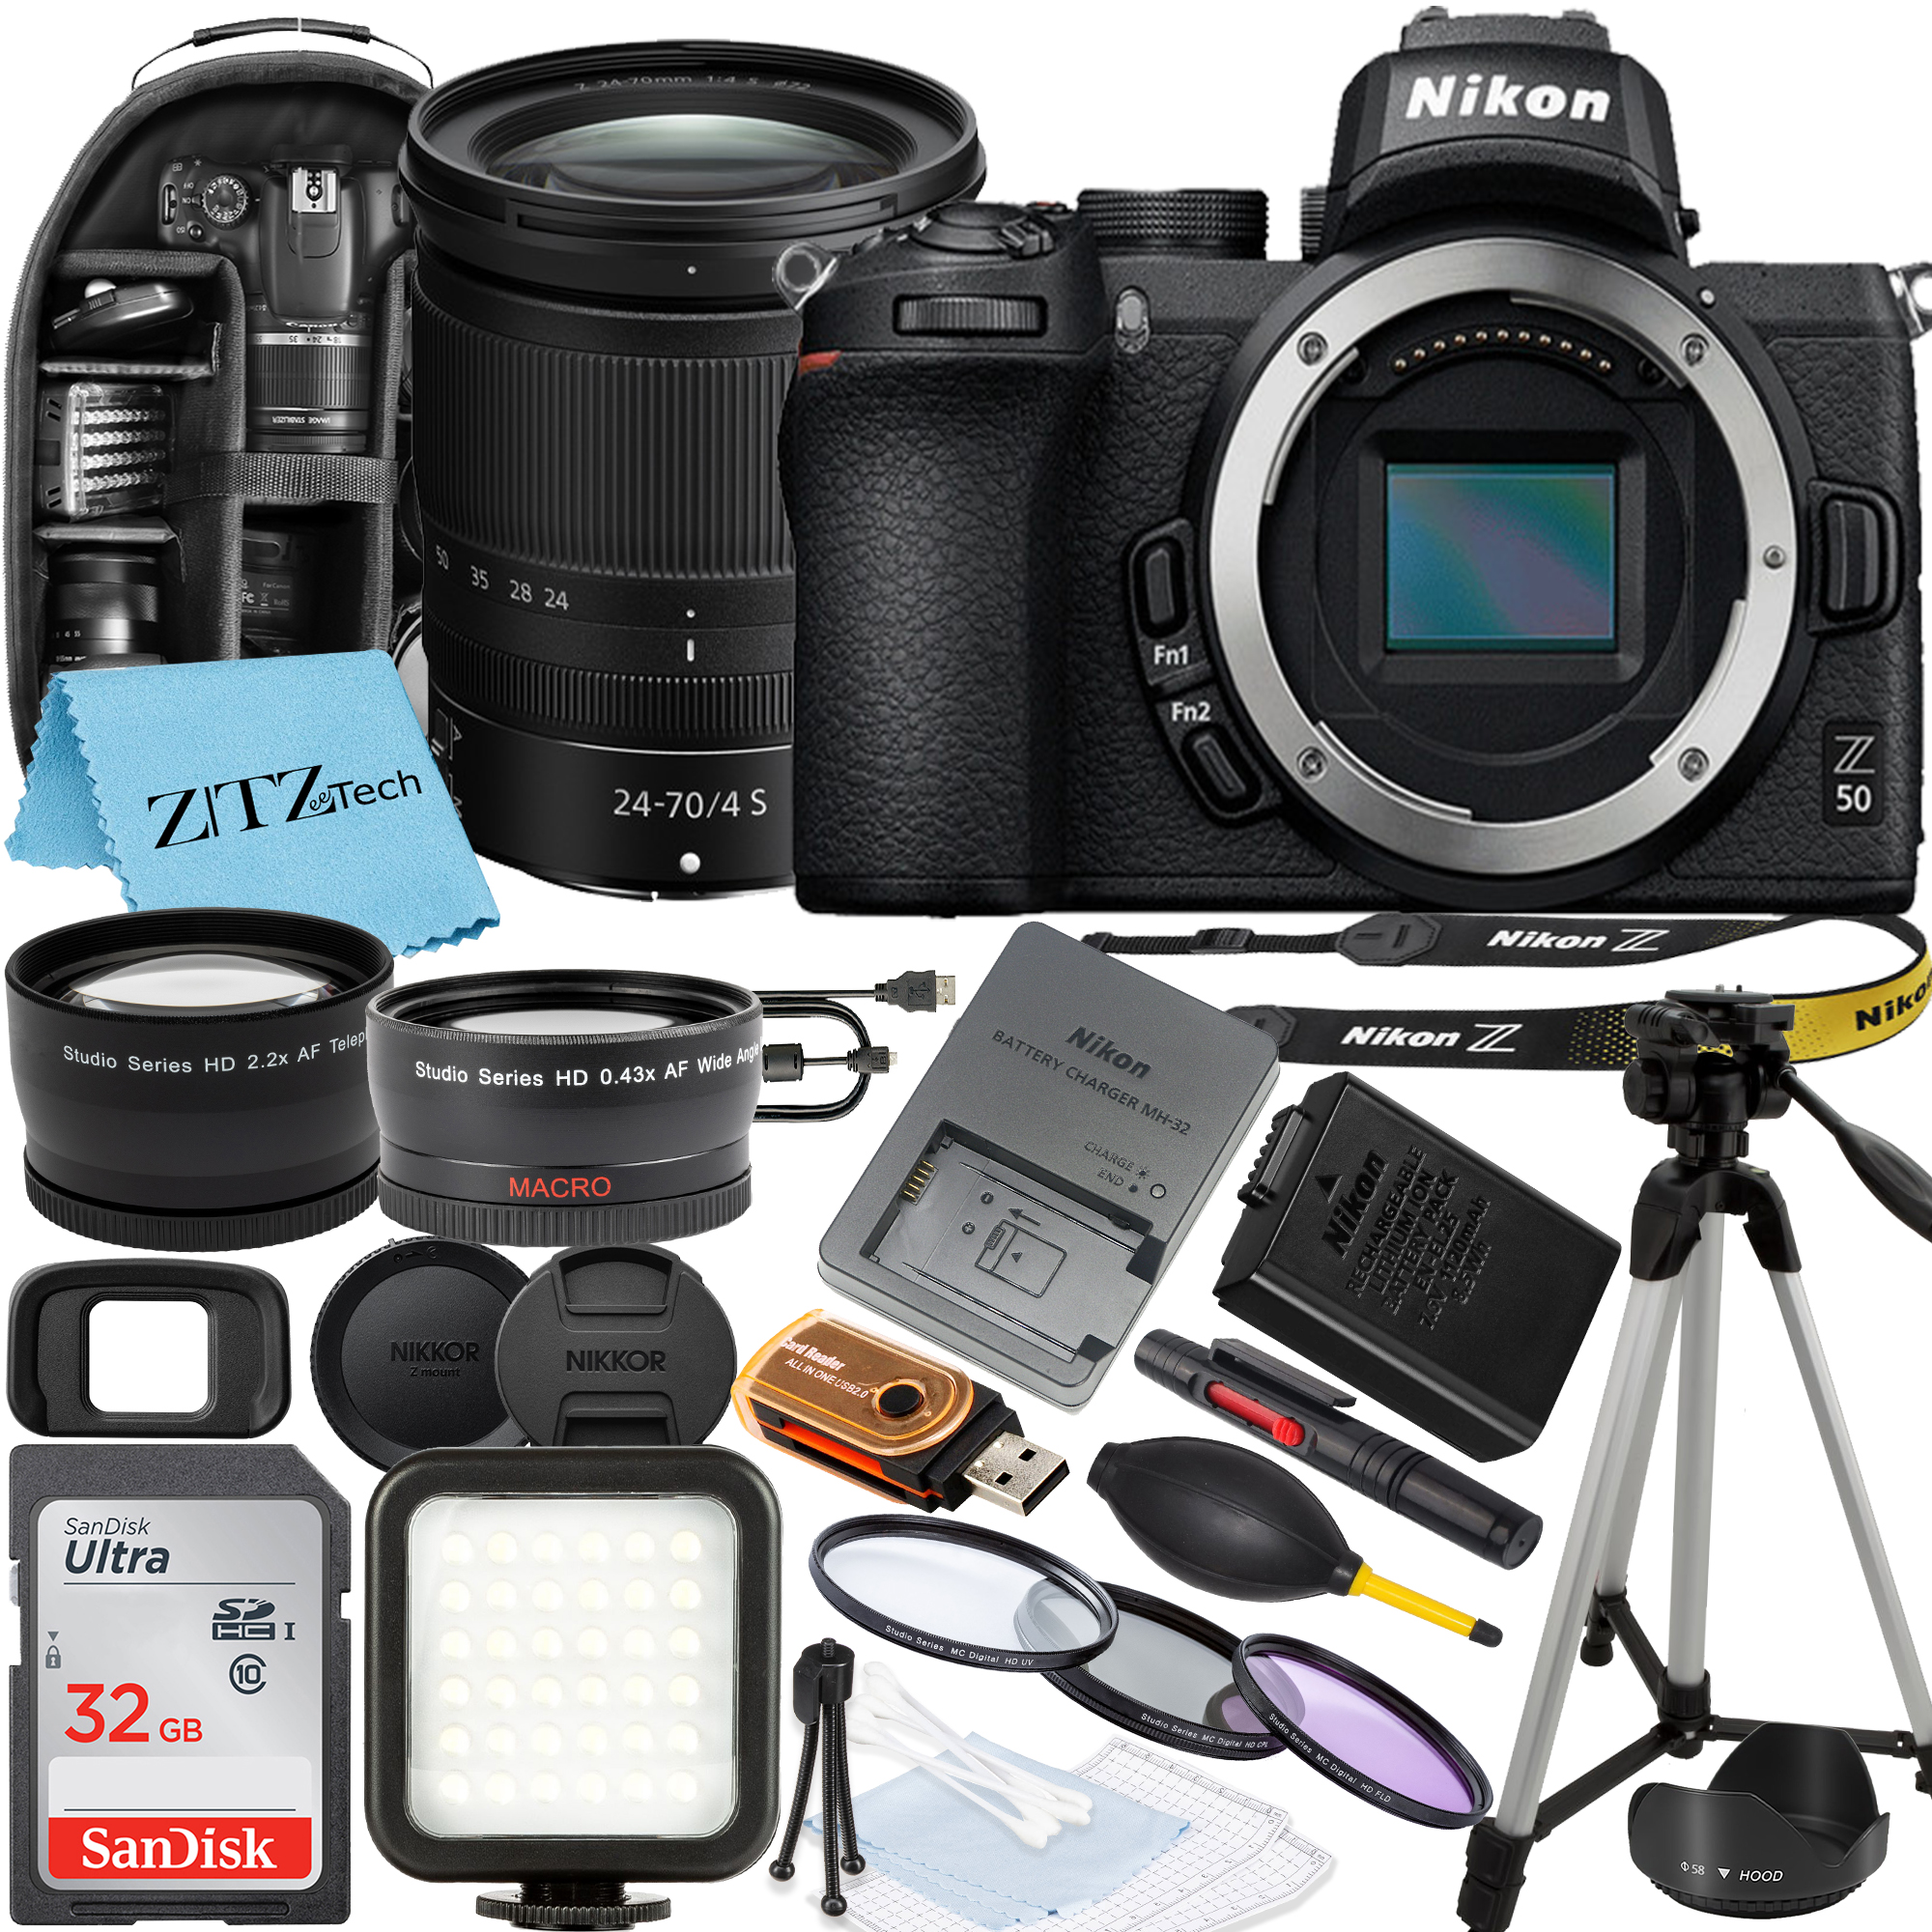 Nikon Z50 Mirrorless Camera with NIKKOR Z 24-70mm f/4 S Lens, SanDisk 32GB Memory Card, Backpack, Flash, Tripod and ZeeTech Accessory Bundle